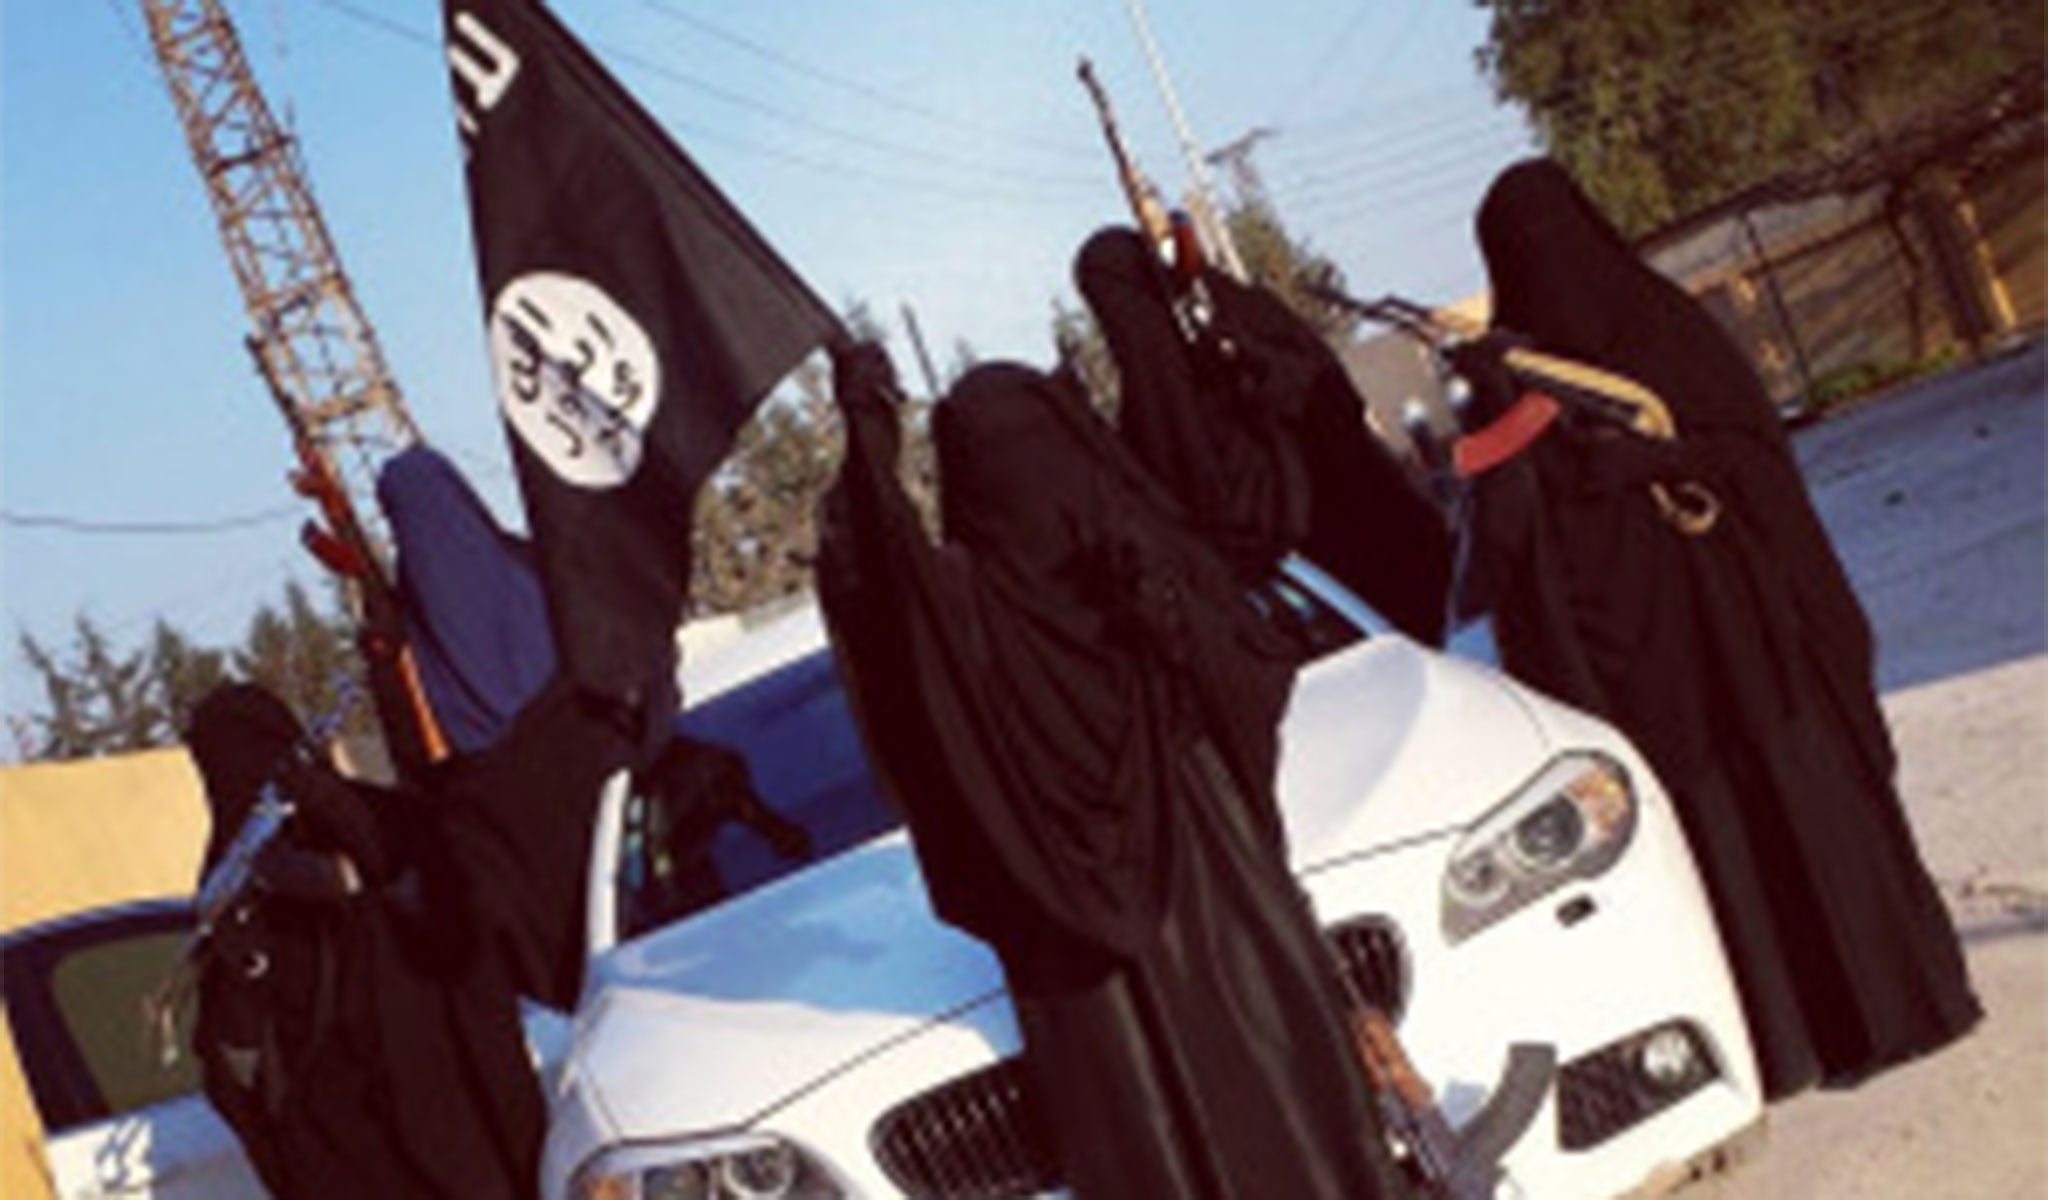 Isis uses an all-women police force to enforce its doctrine